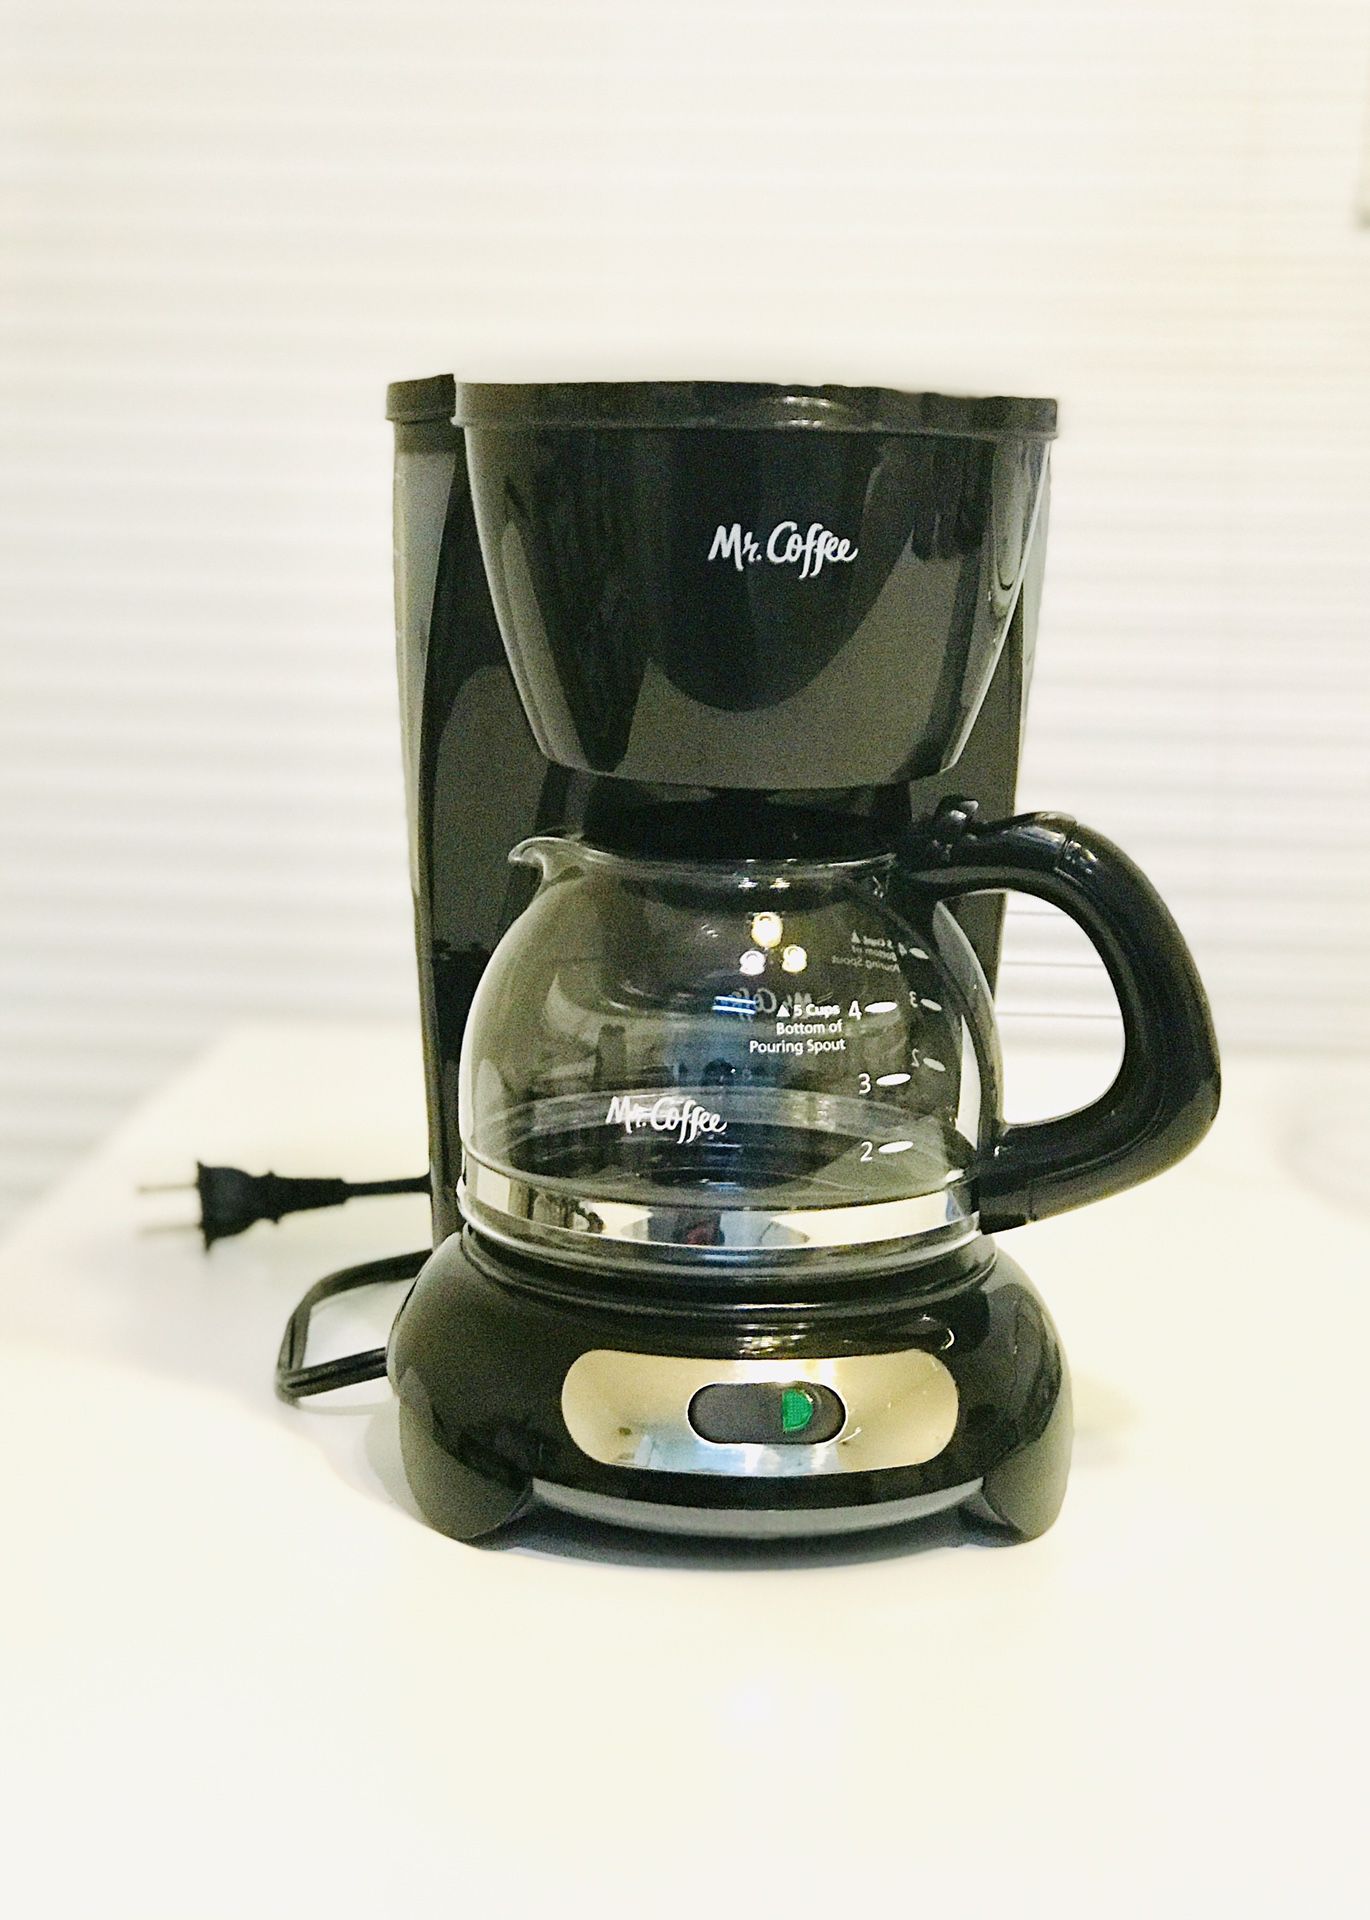 Krups Brewmaster Jr Type 170 4 Cup Automatic Drip Coffee Maker Black RV  Camper for Sale in Manassas, VA - OfferUp